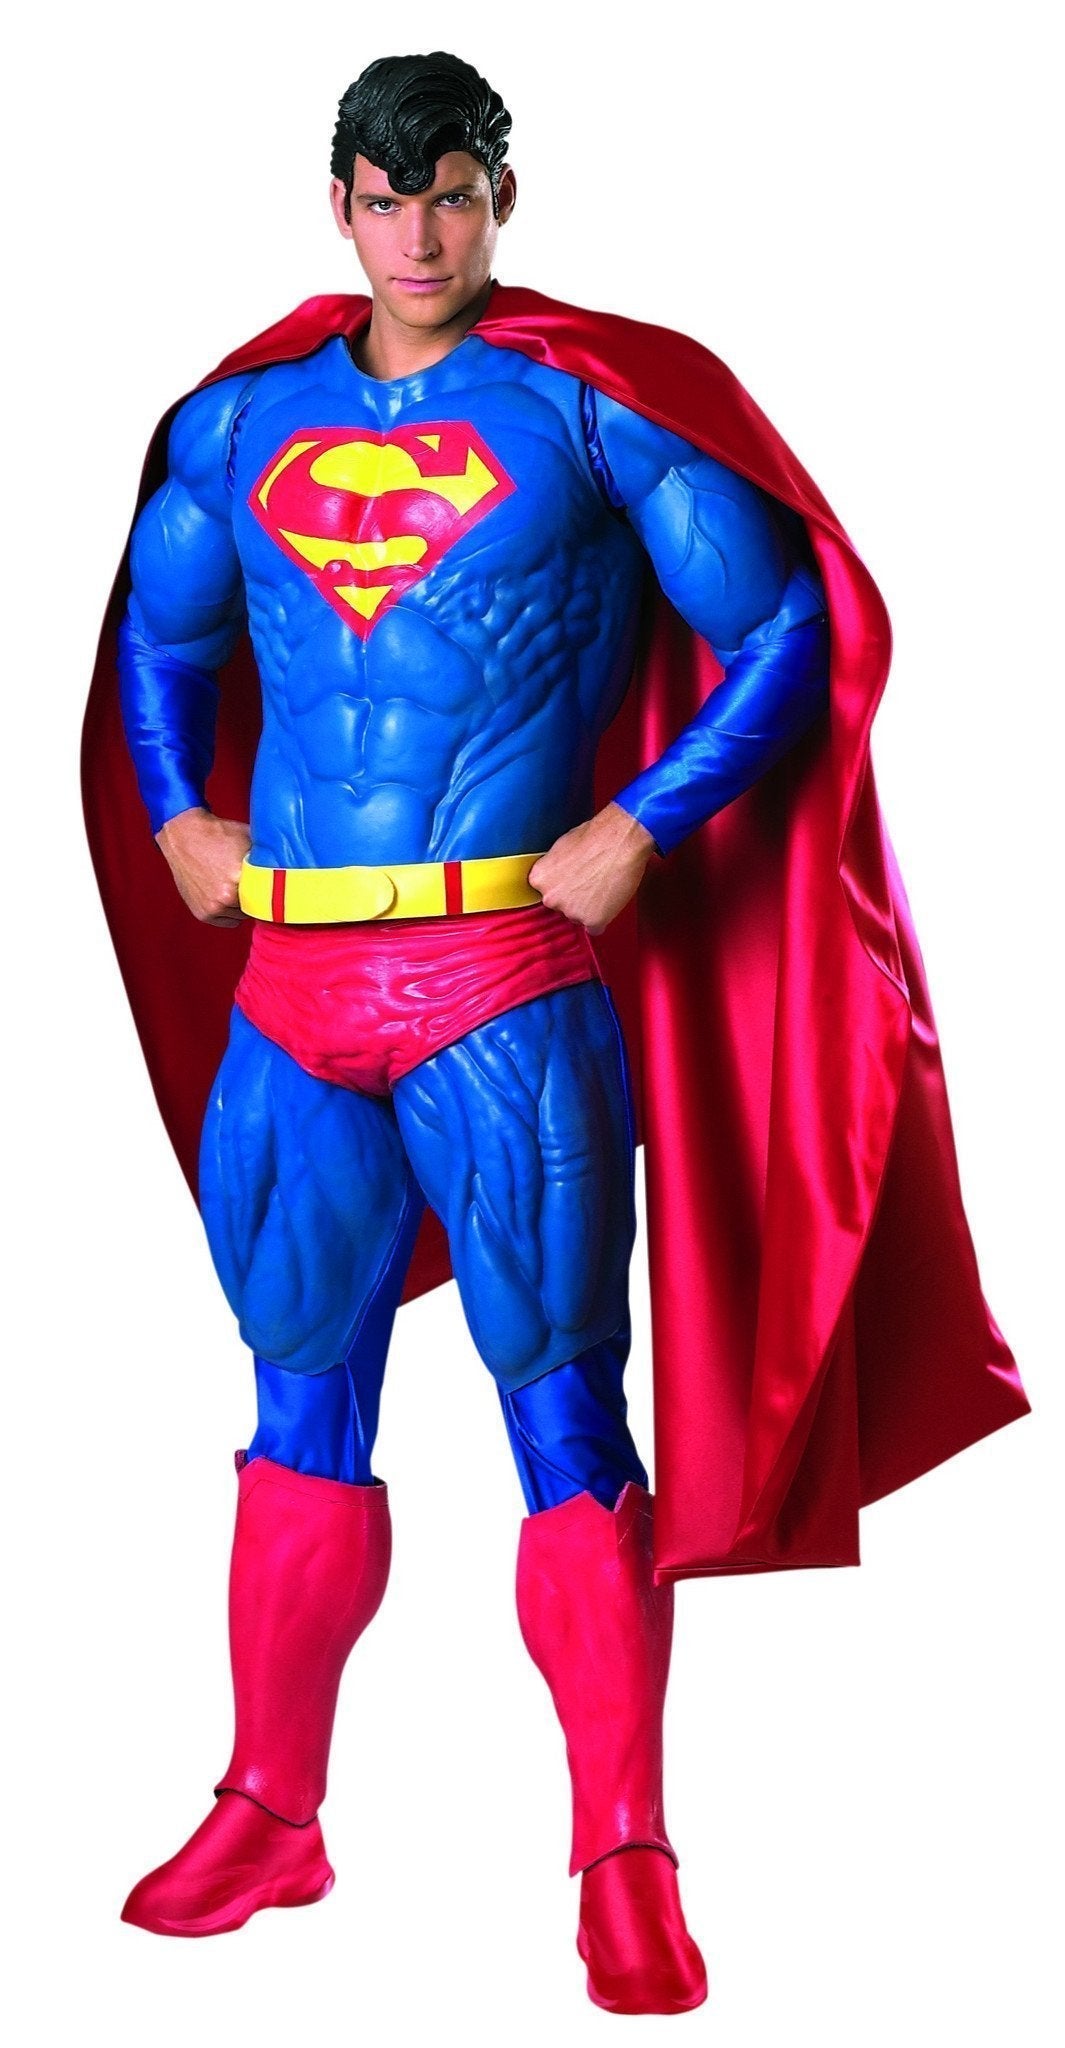 Superman Collector's Edition Costume for Adults - Warner Bros DC Comics